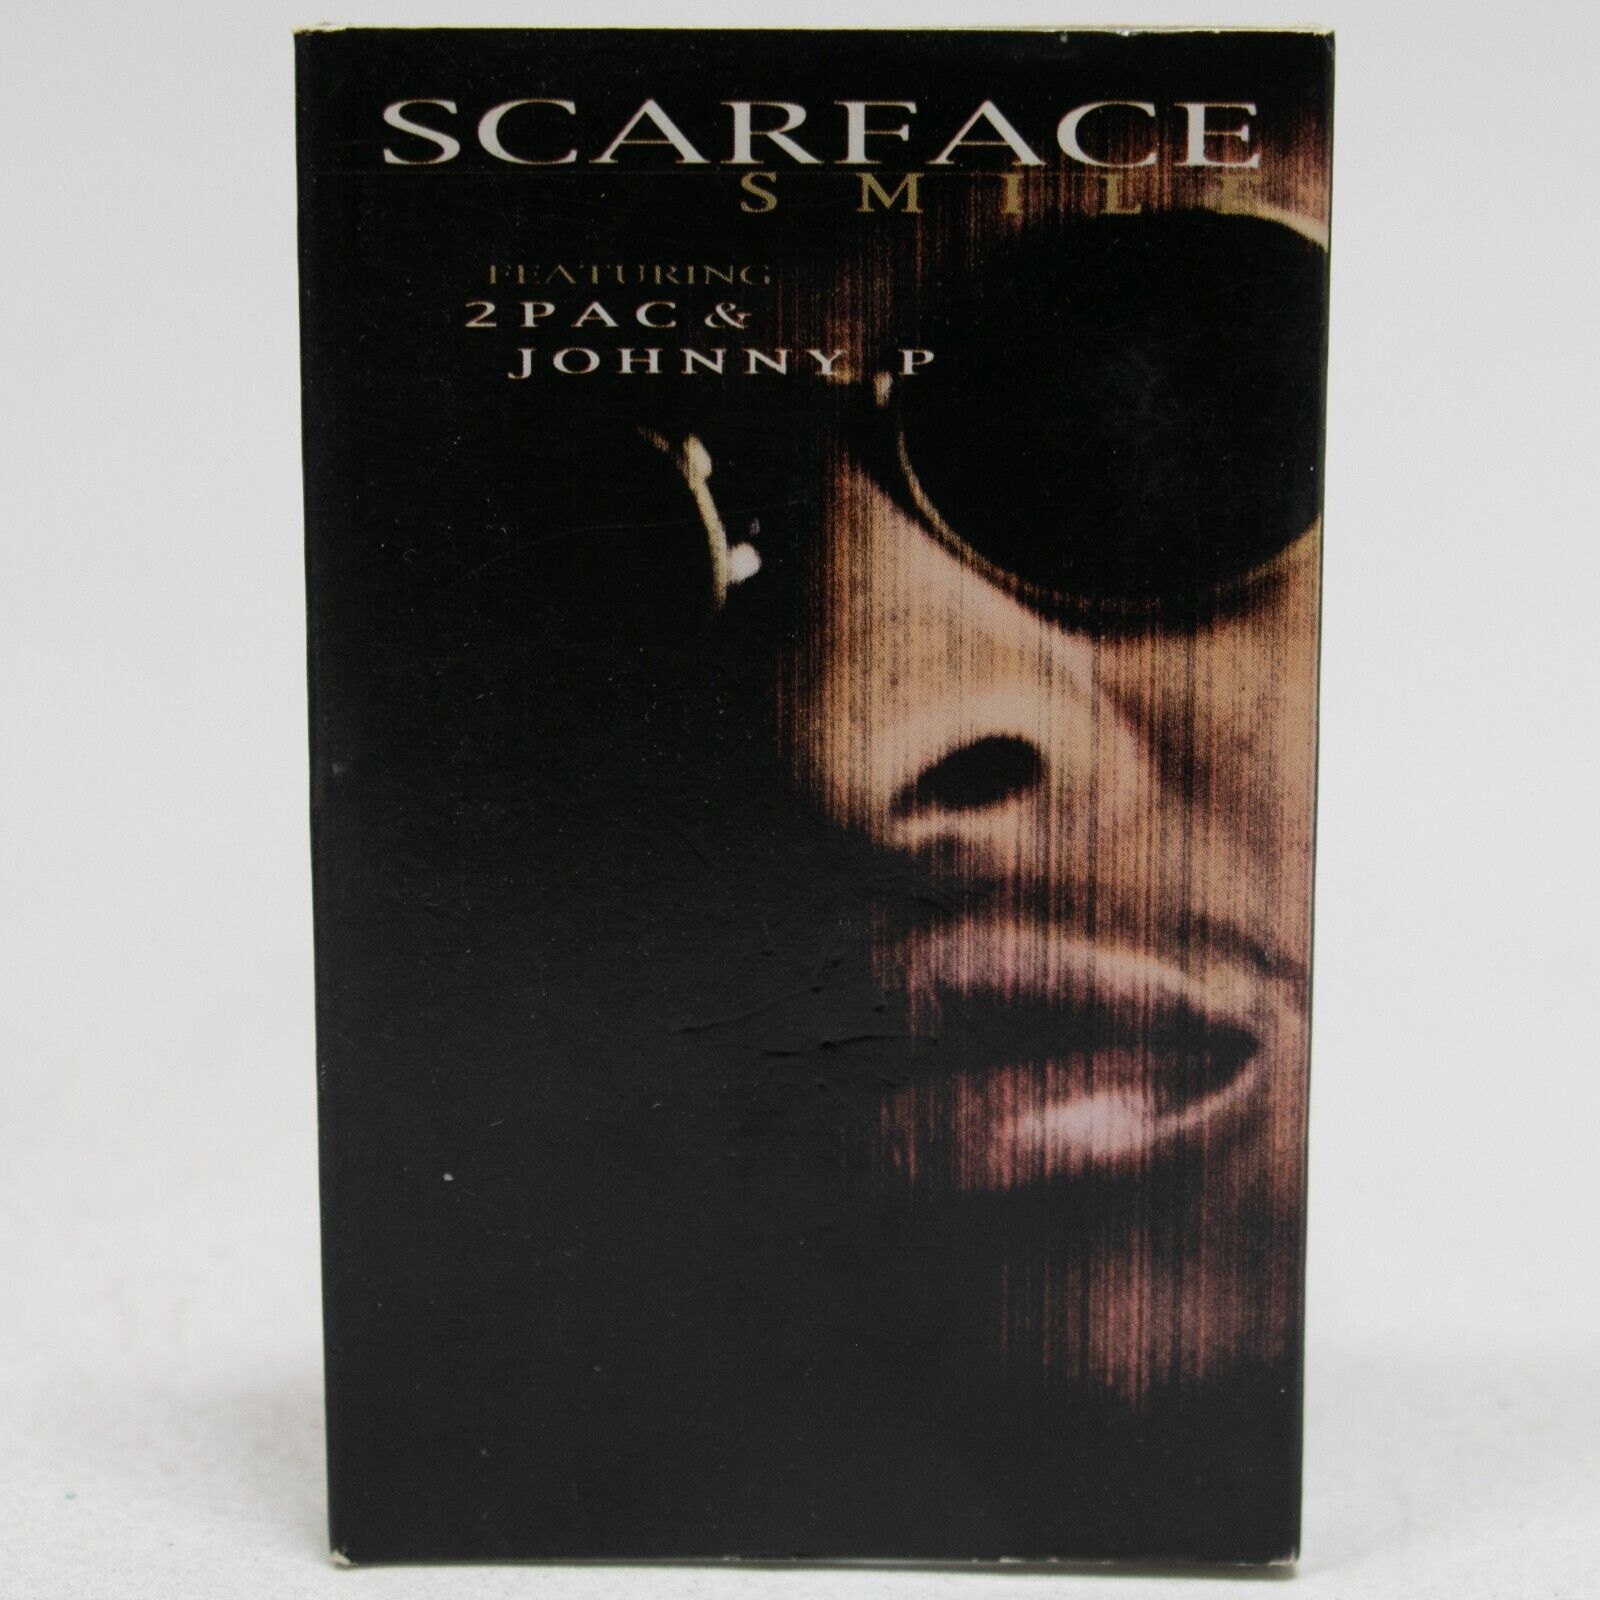 Scarface Featuring 2Pac & Johnny P Smile Cassette Tape Single